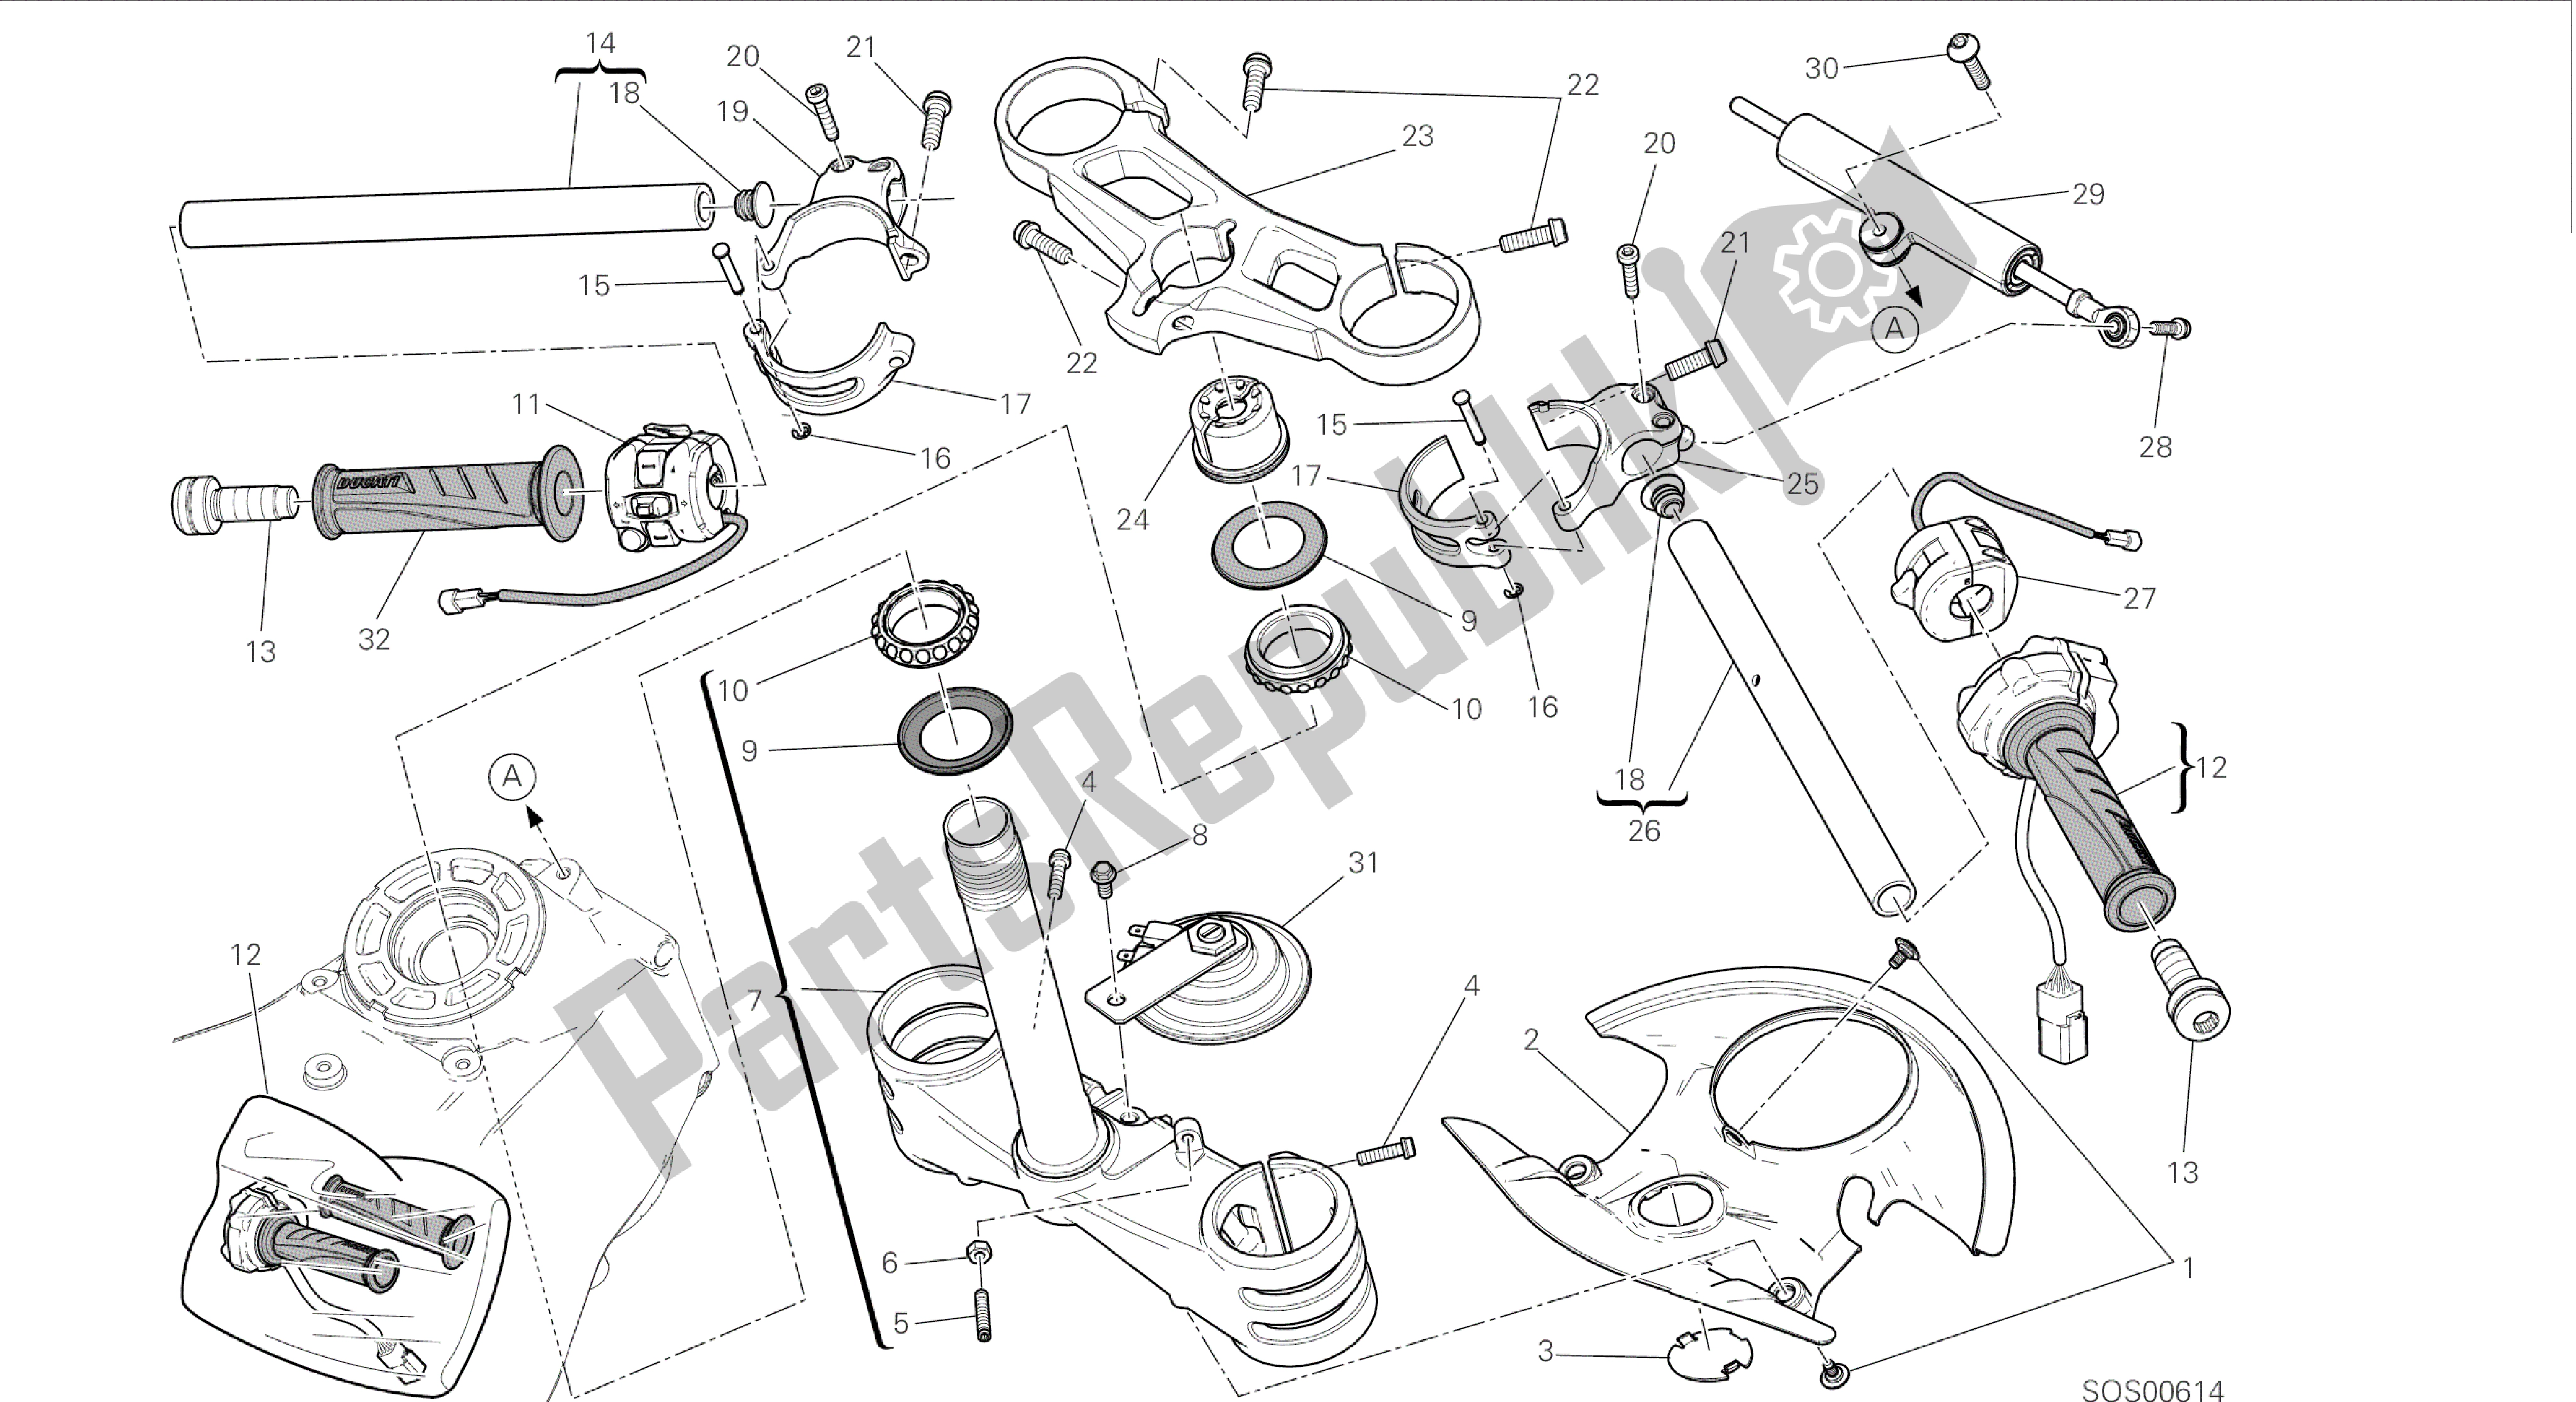 All parts for the Drawing 021 - Semimanubri - Ammortizzatore Di Sterzo [mod:899 Abs,899aws]group Frame of the Ducati Panigale 899 2015